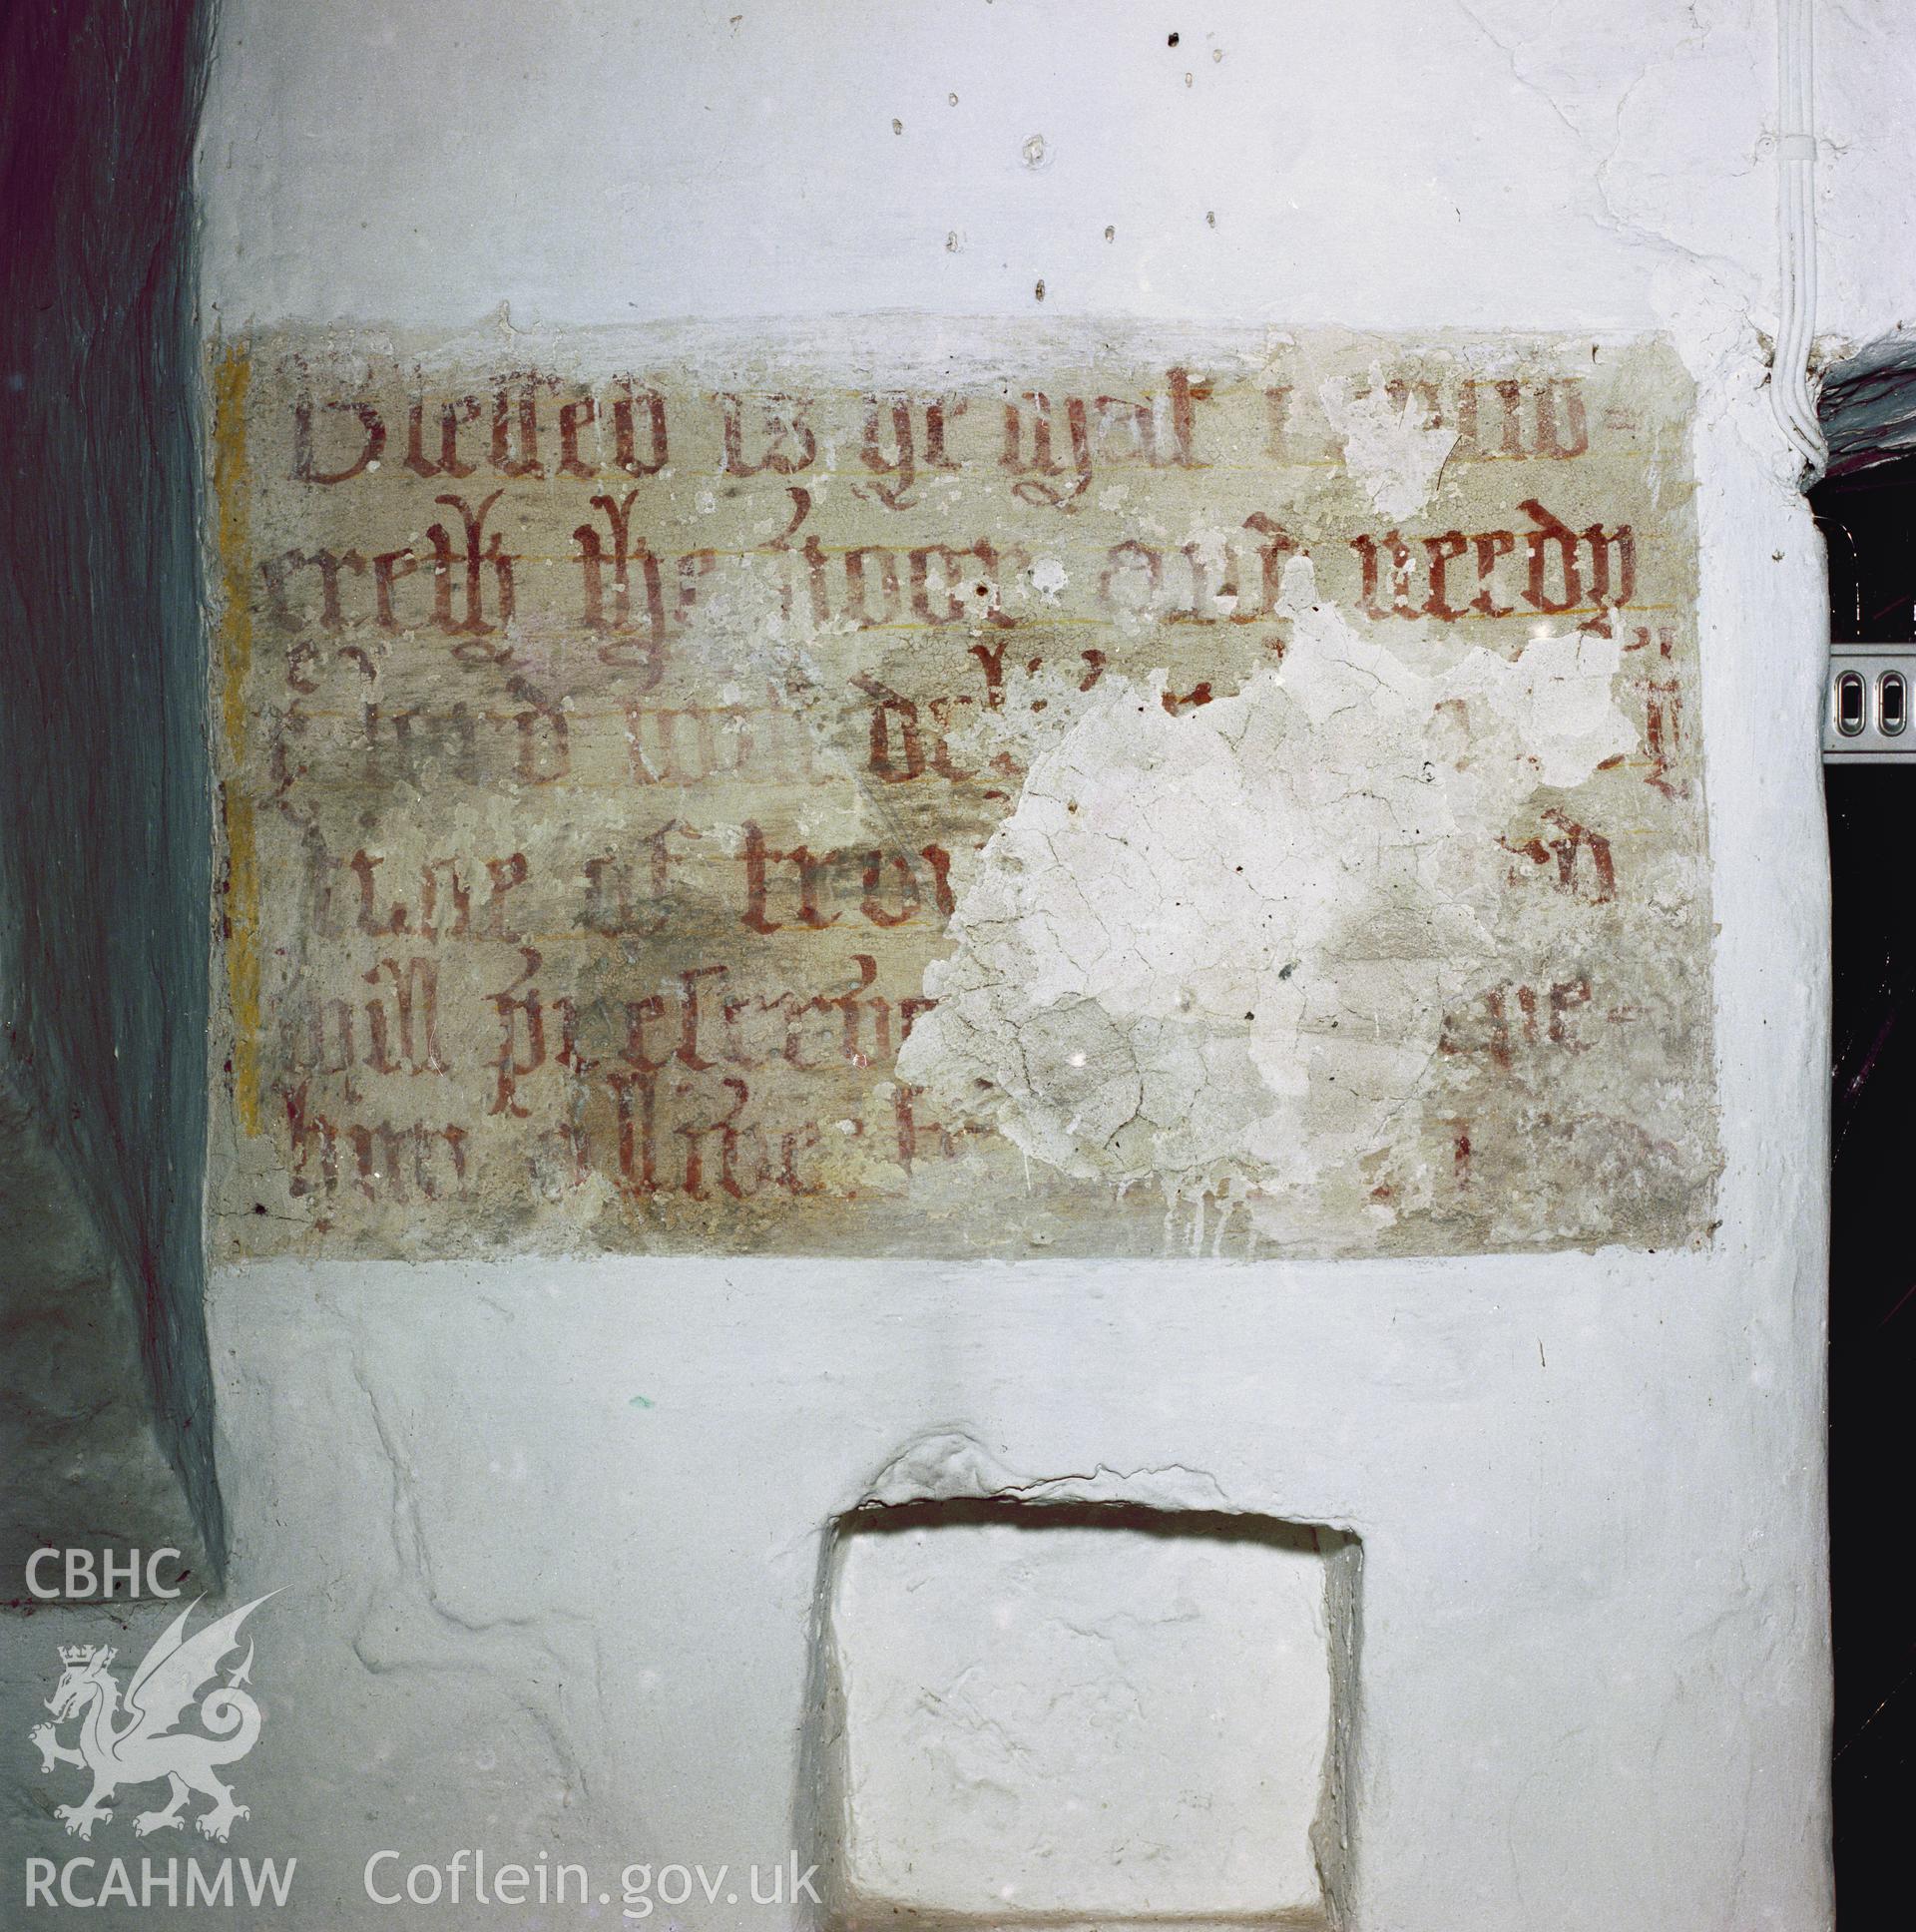 RCAHMW colour negative of colour transparency (reference number 862078), showing wallpainting at Eglwys Brewis Church, taken by Iain Wright, 2003